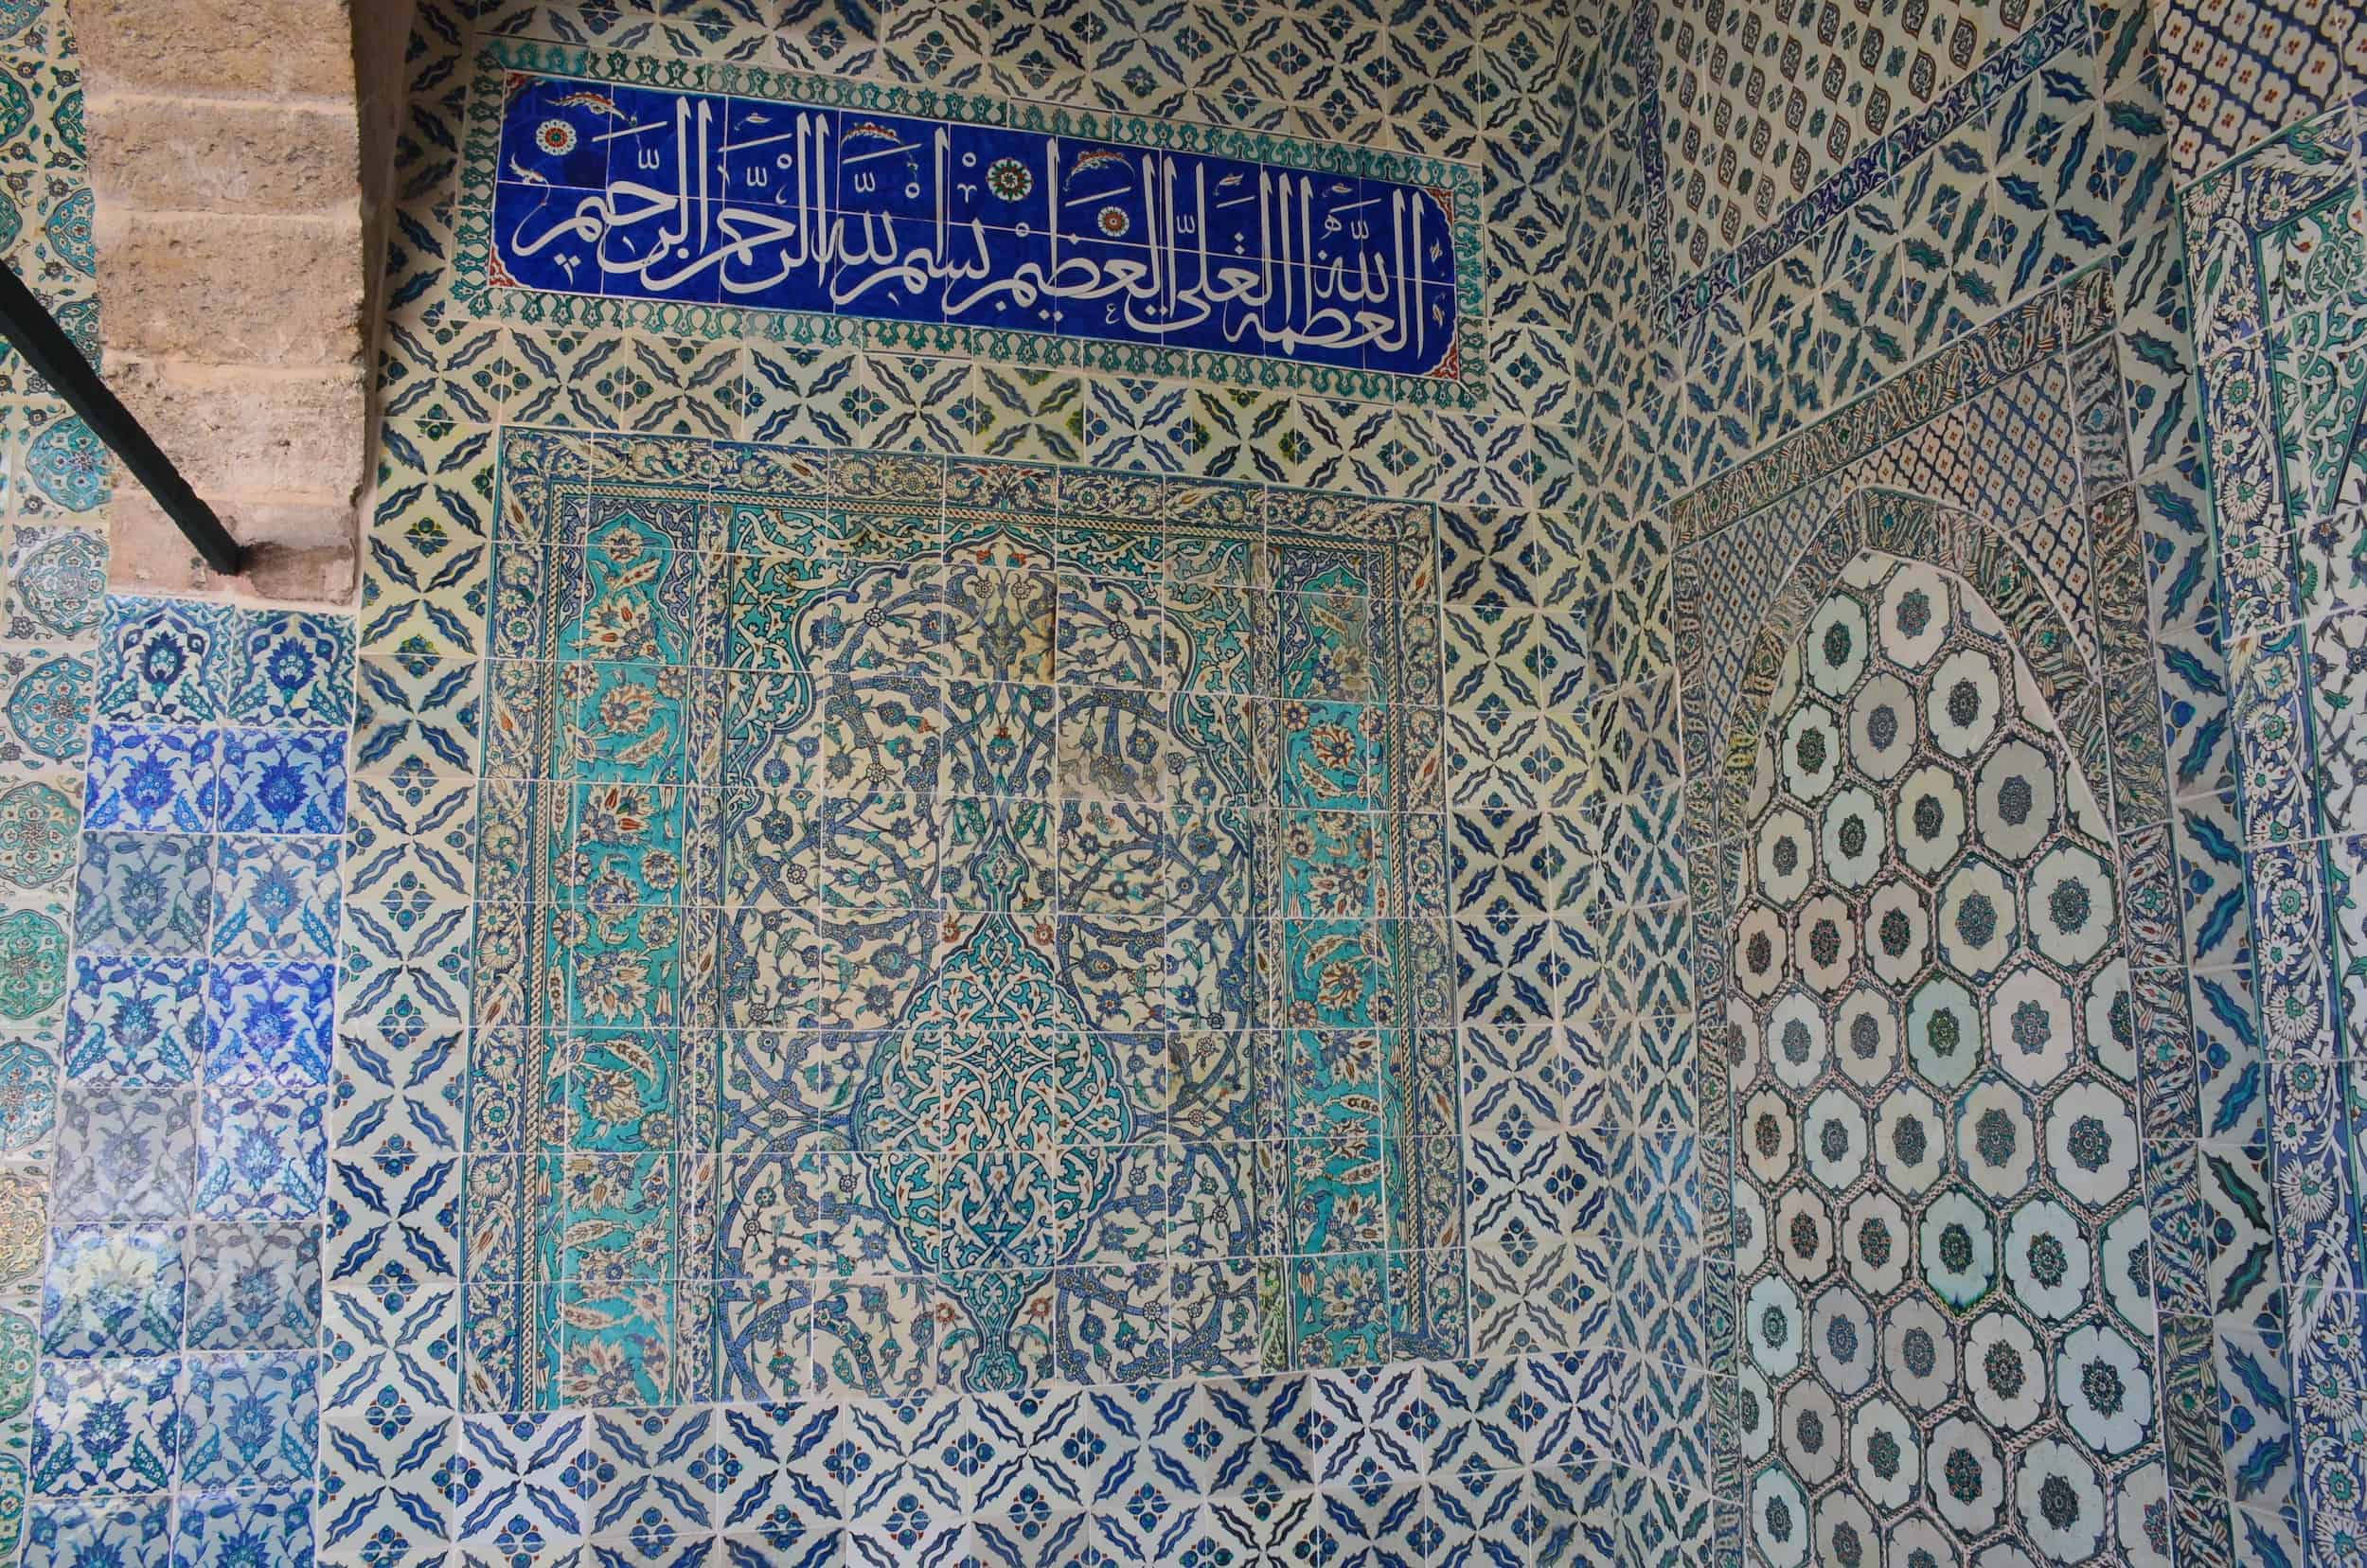 Tiles in the Courtyard of the Queen Mother